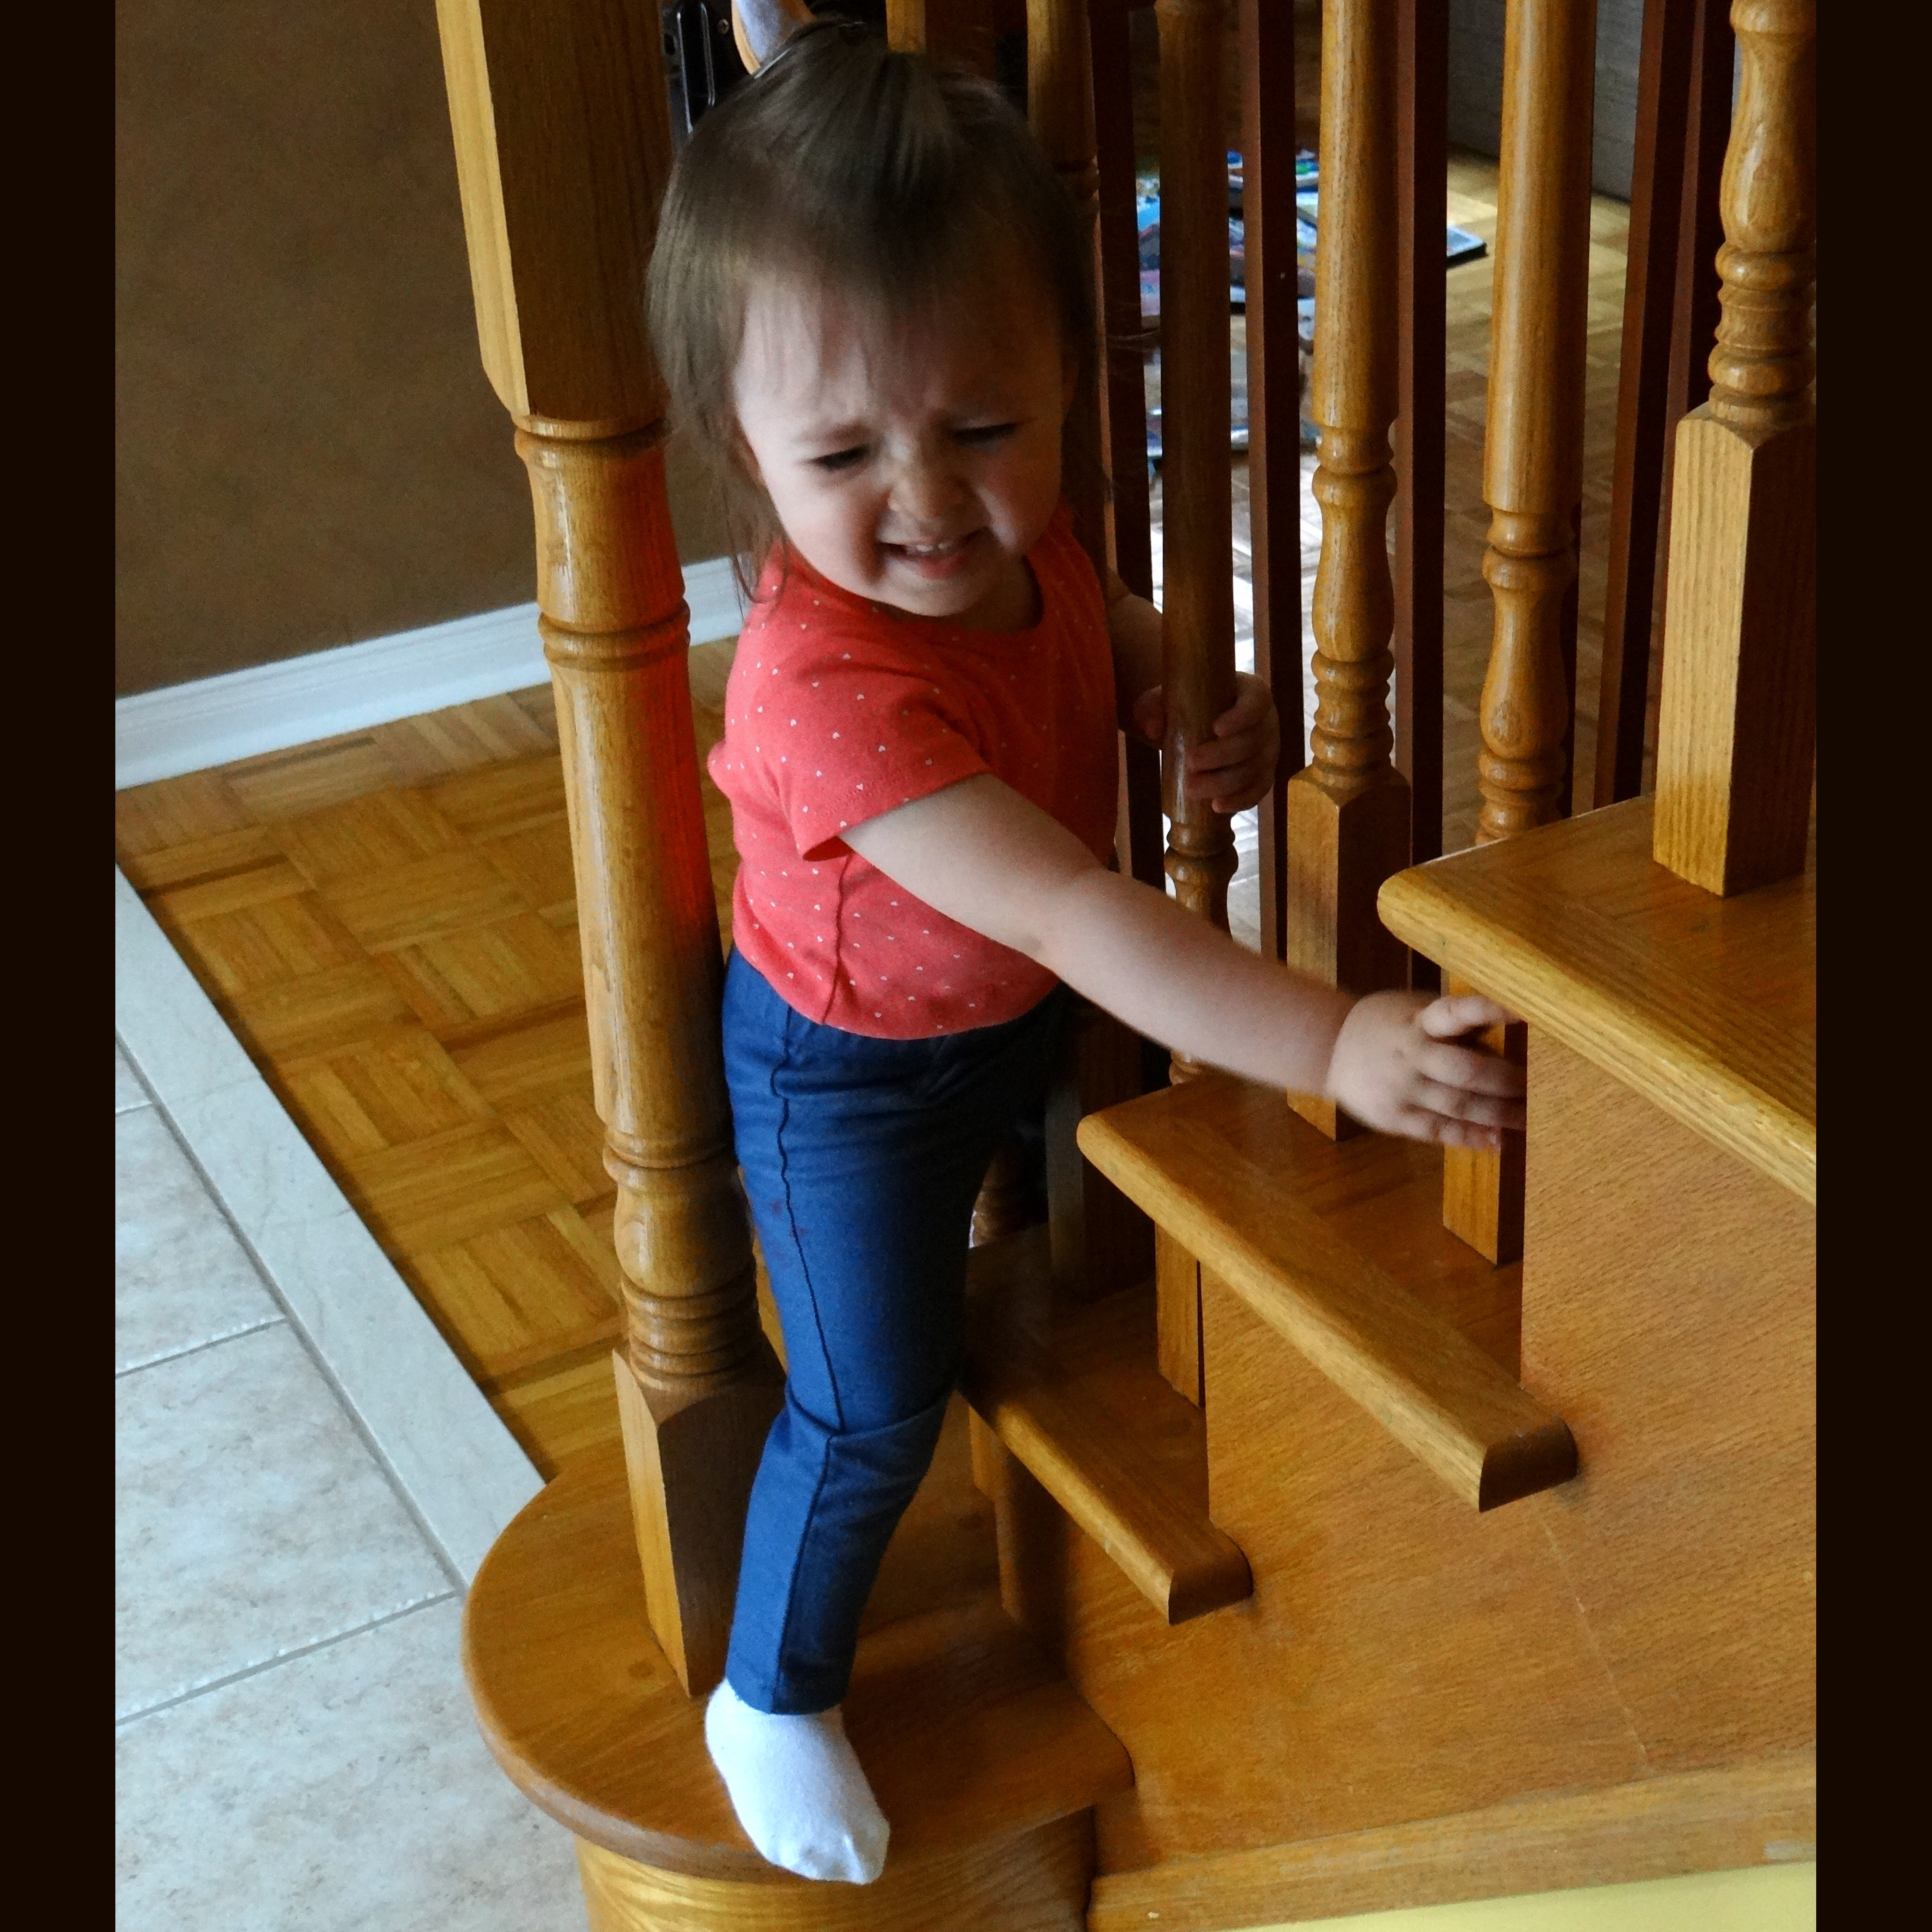 Peachy trying to outwit the toddler safety gate